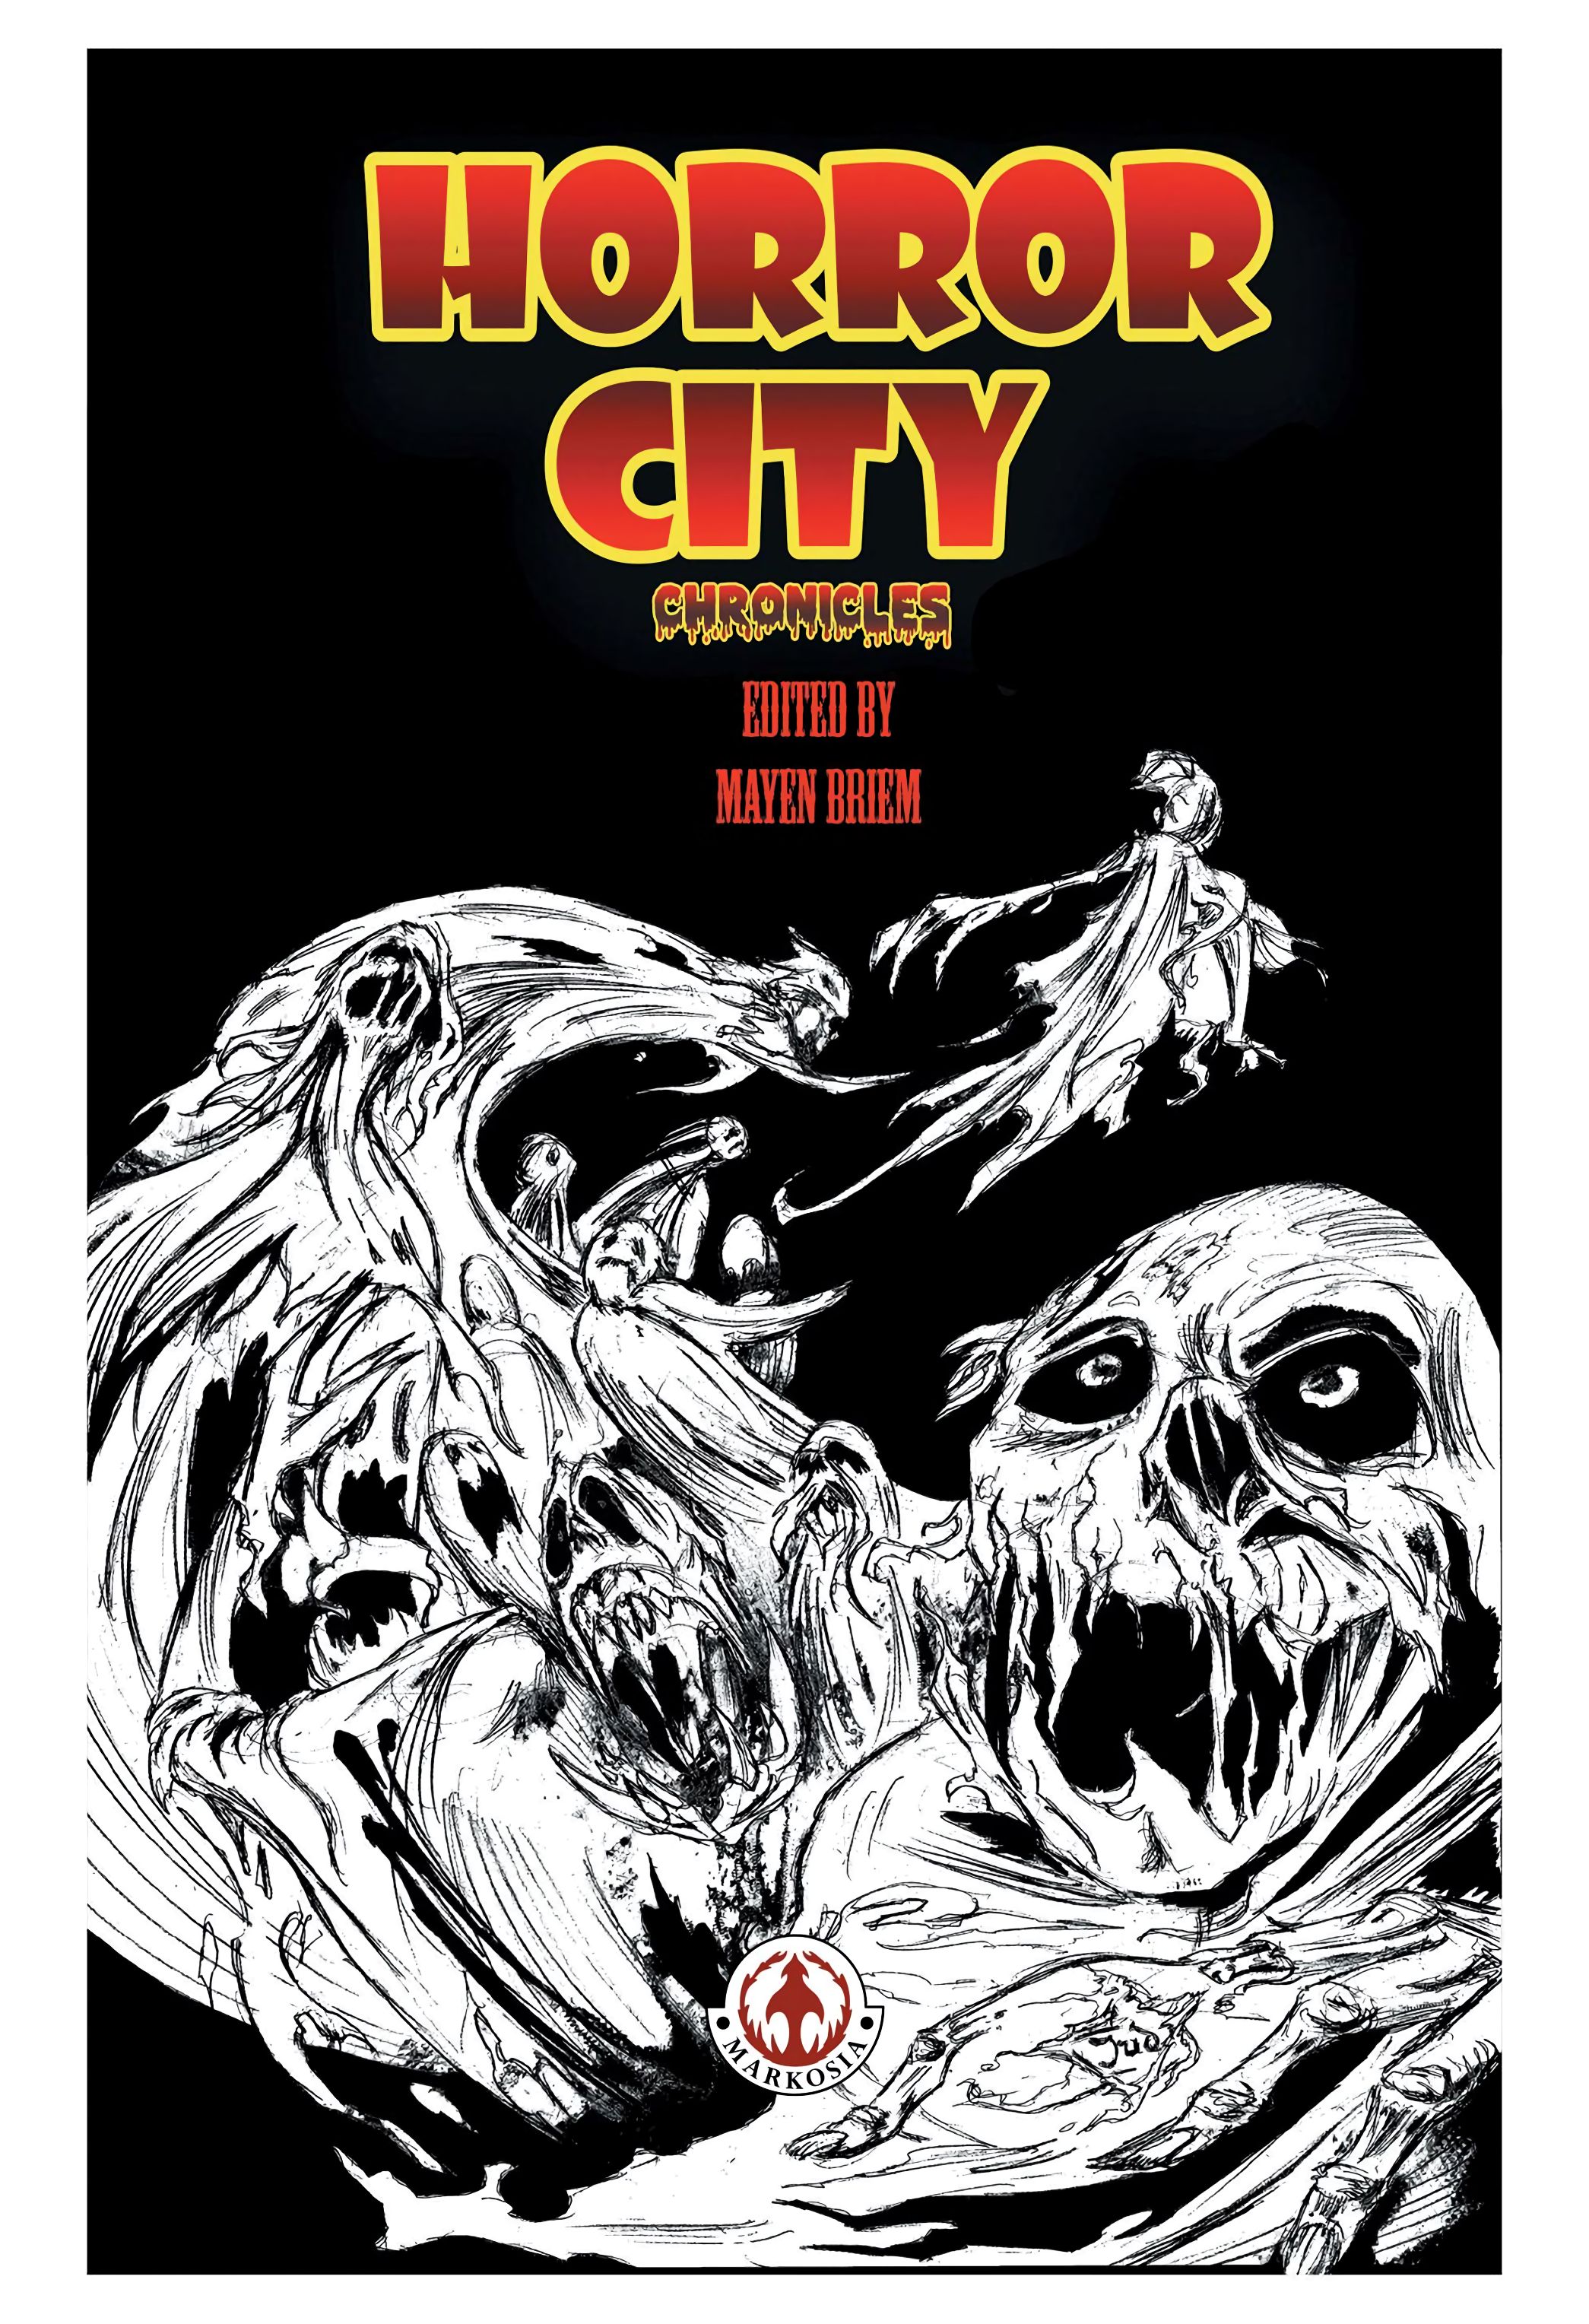 Read online Horror City Chronicles comic -  Issue # TPB (Part 1) - 2